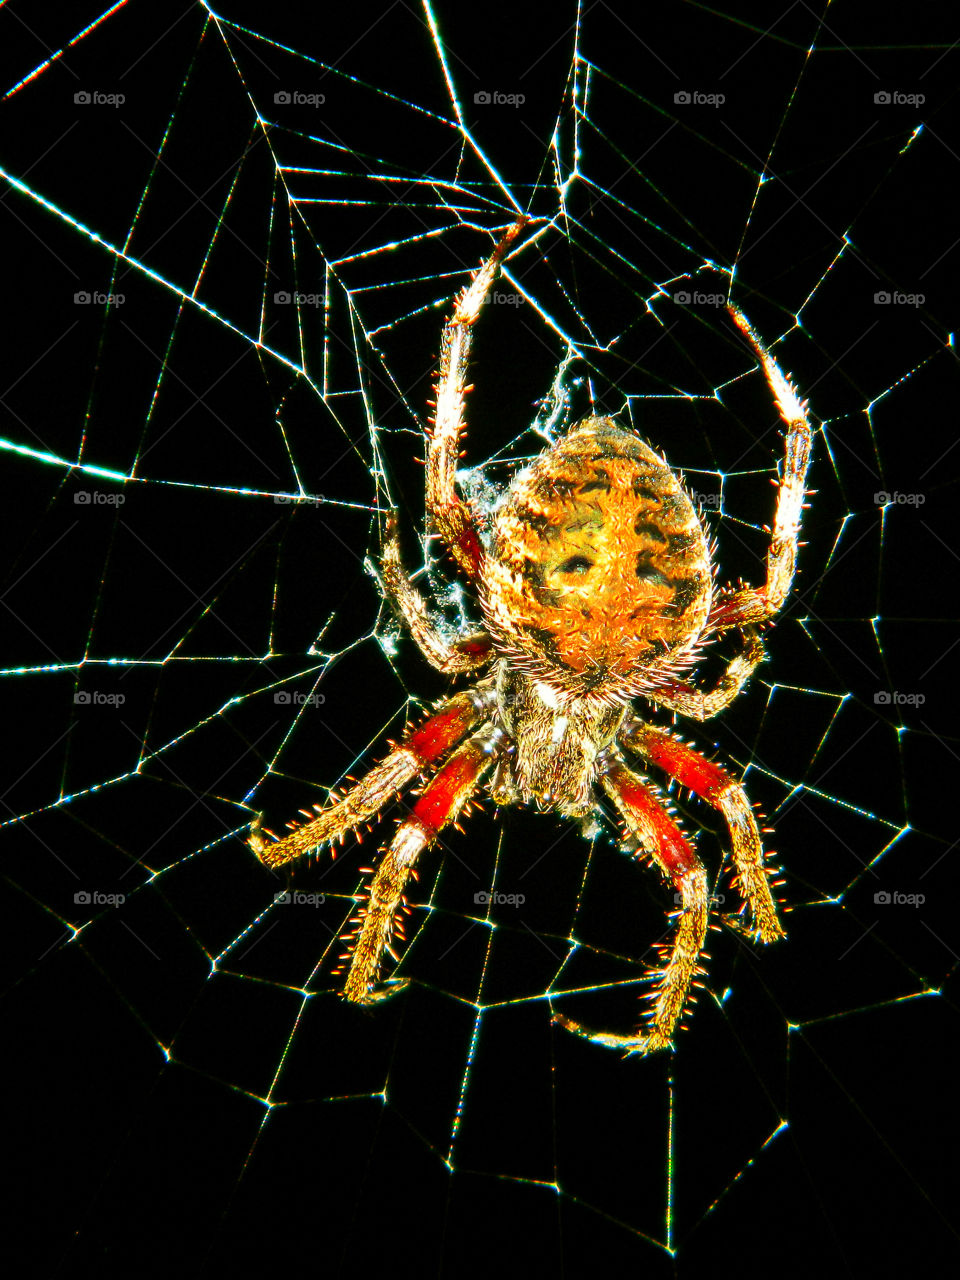 This spider builds its nest at night and destroys before morning! Intriguing, at most! Don't know where it goes!